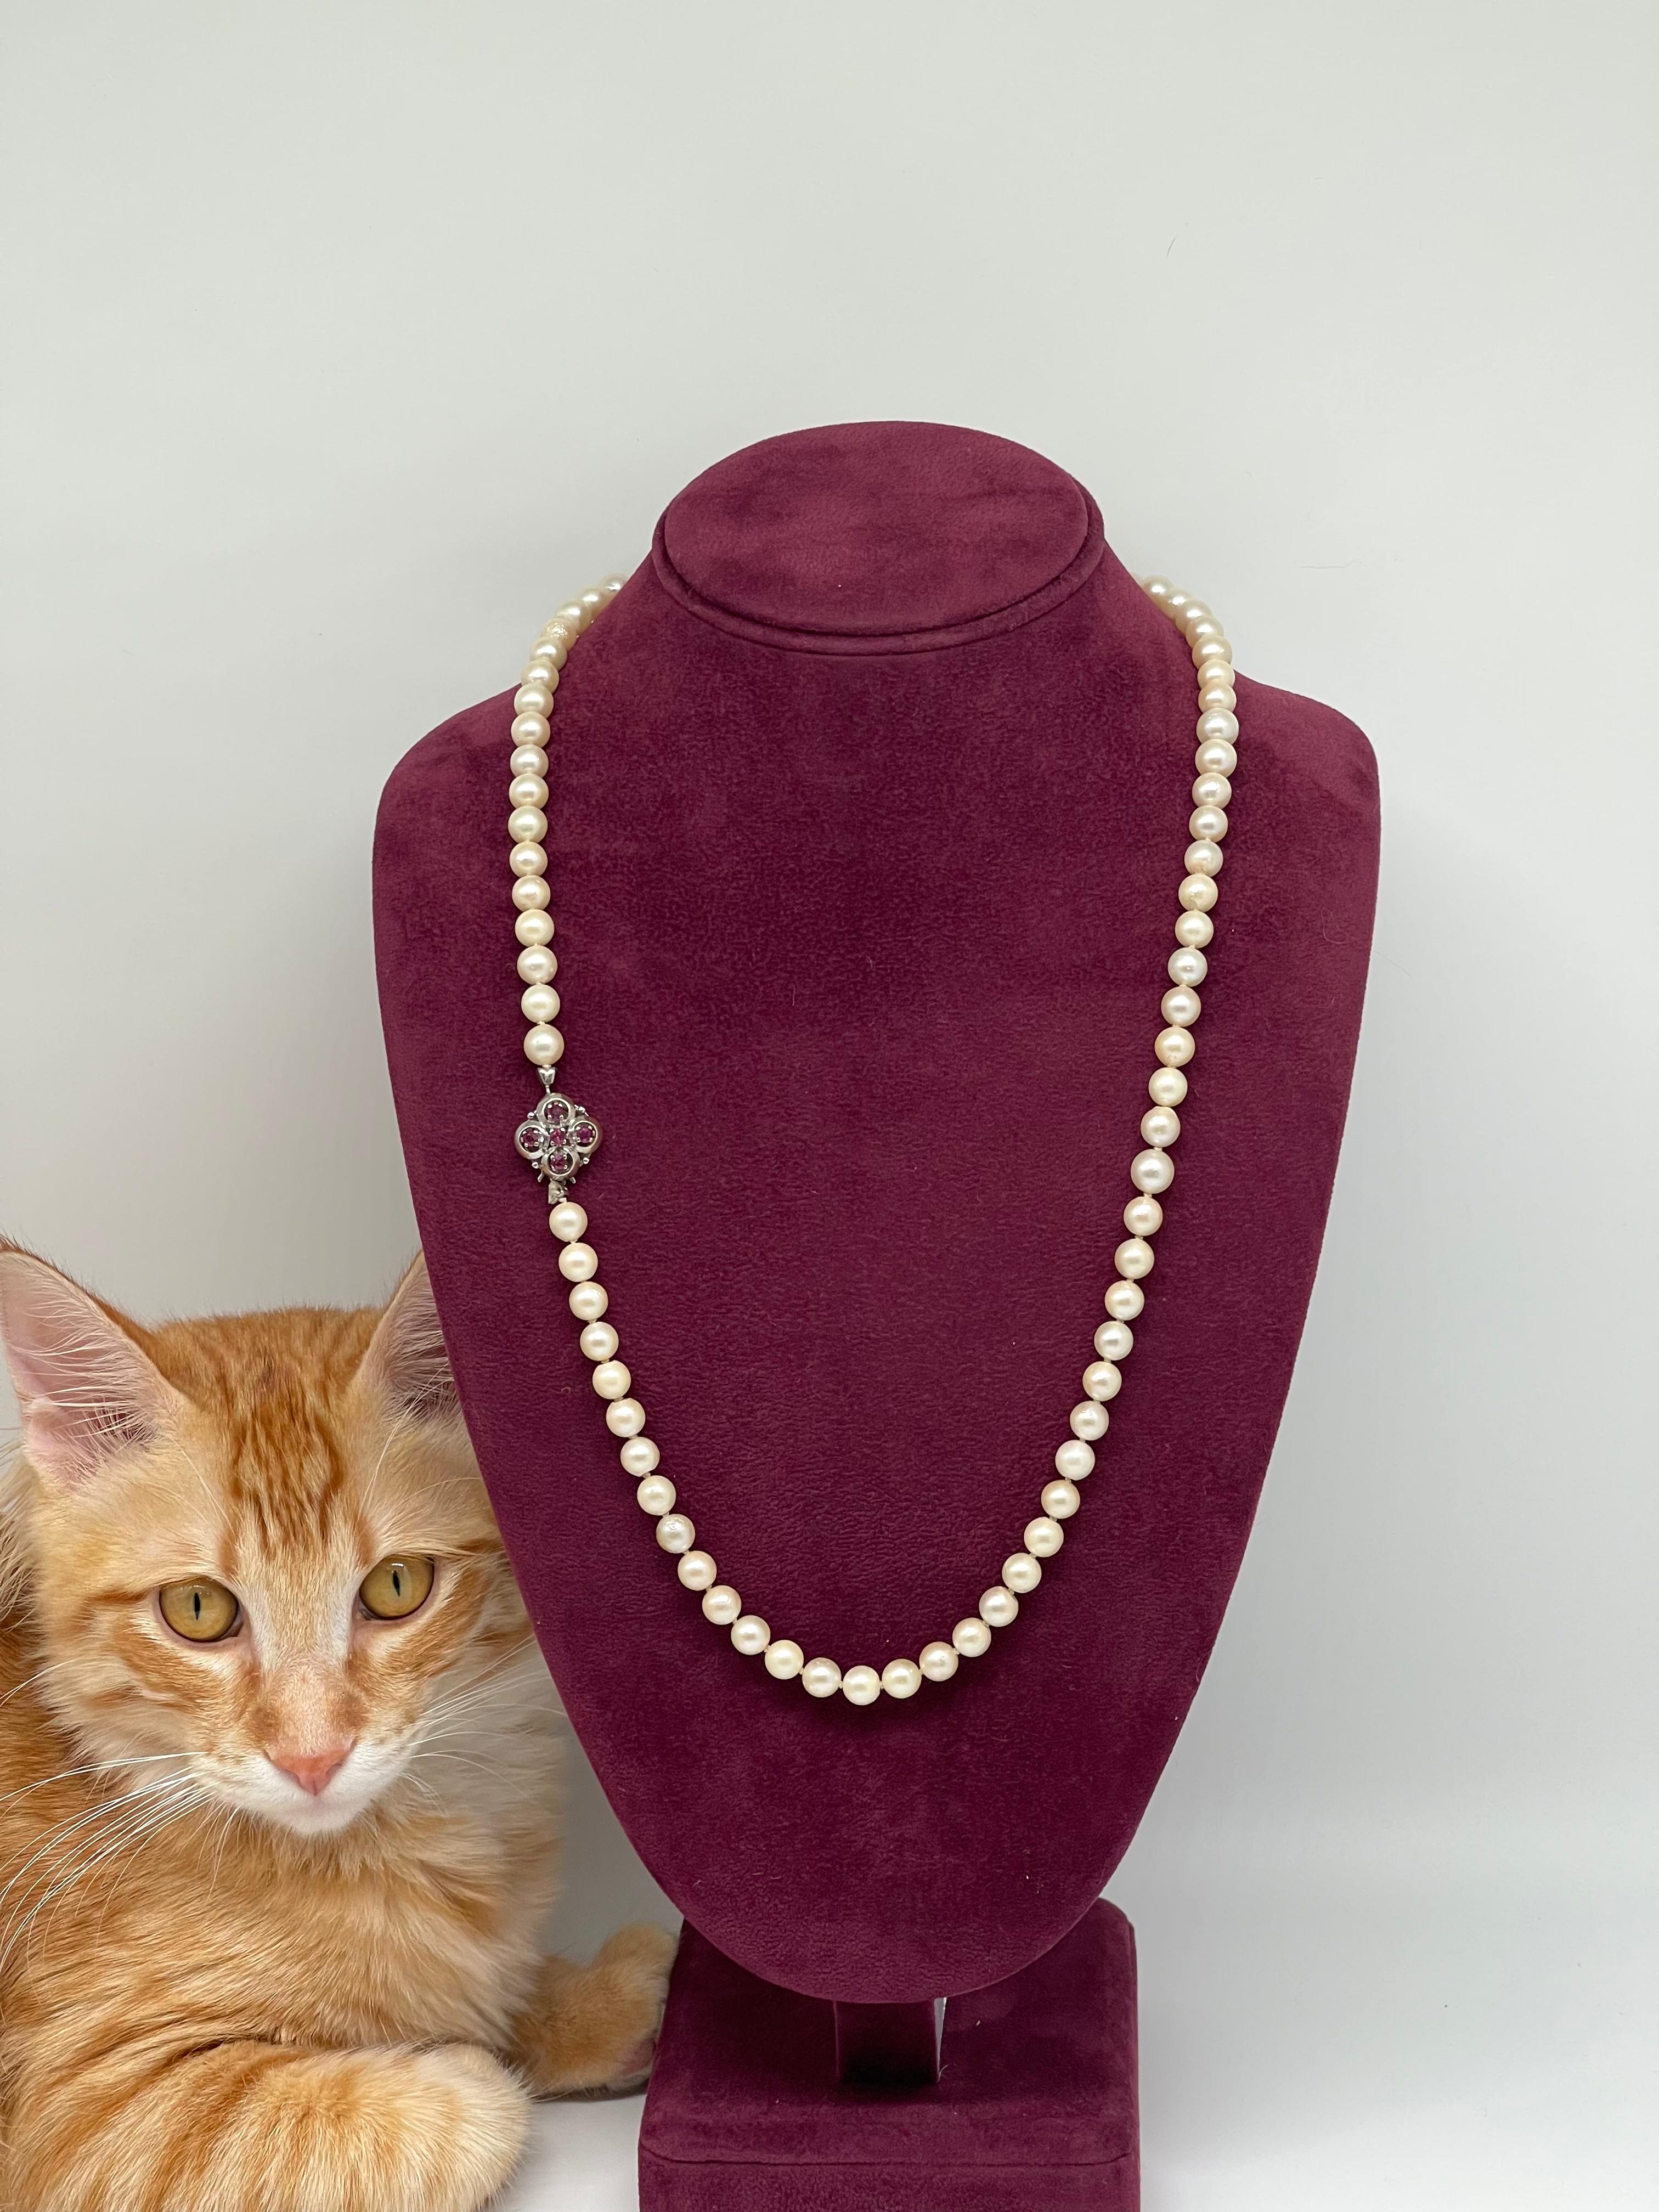 Akoya Pearl Necklace with 14 kt. White Gold and Ruby Clasp In Excellent Condition For Sale In Viana do Castelo, PT